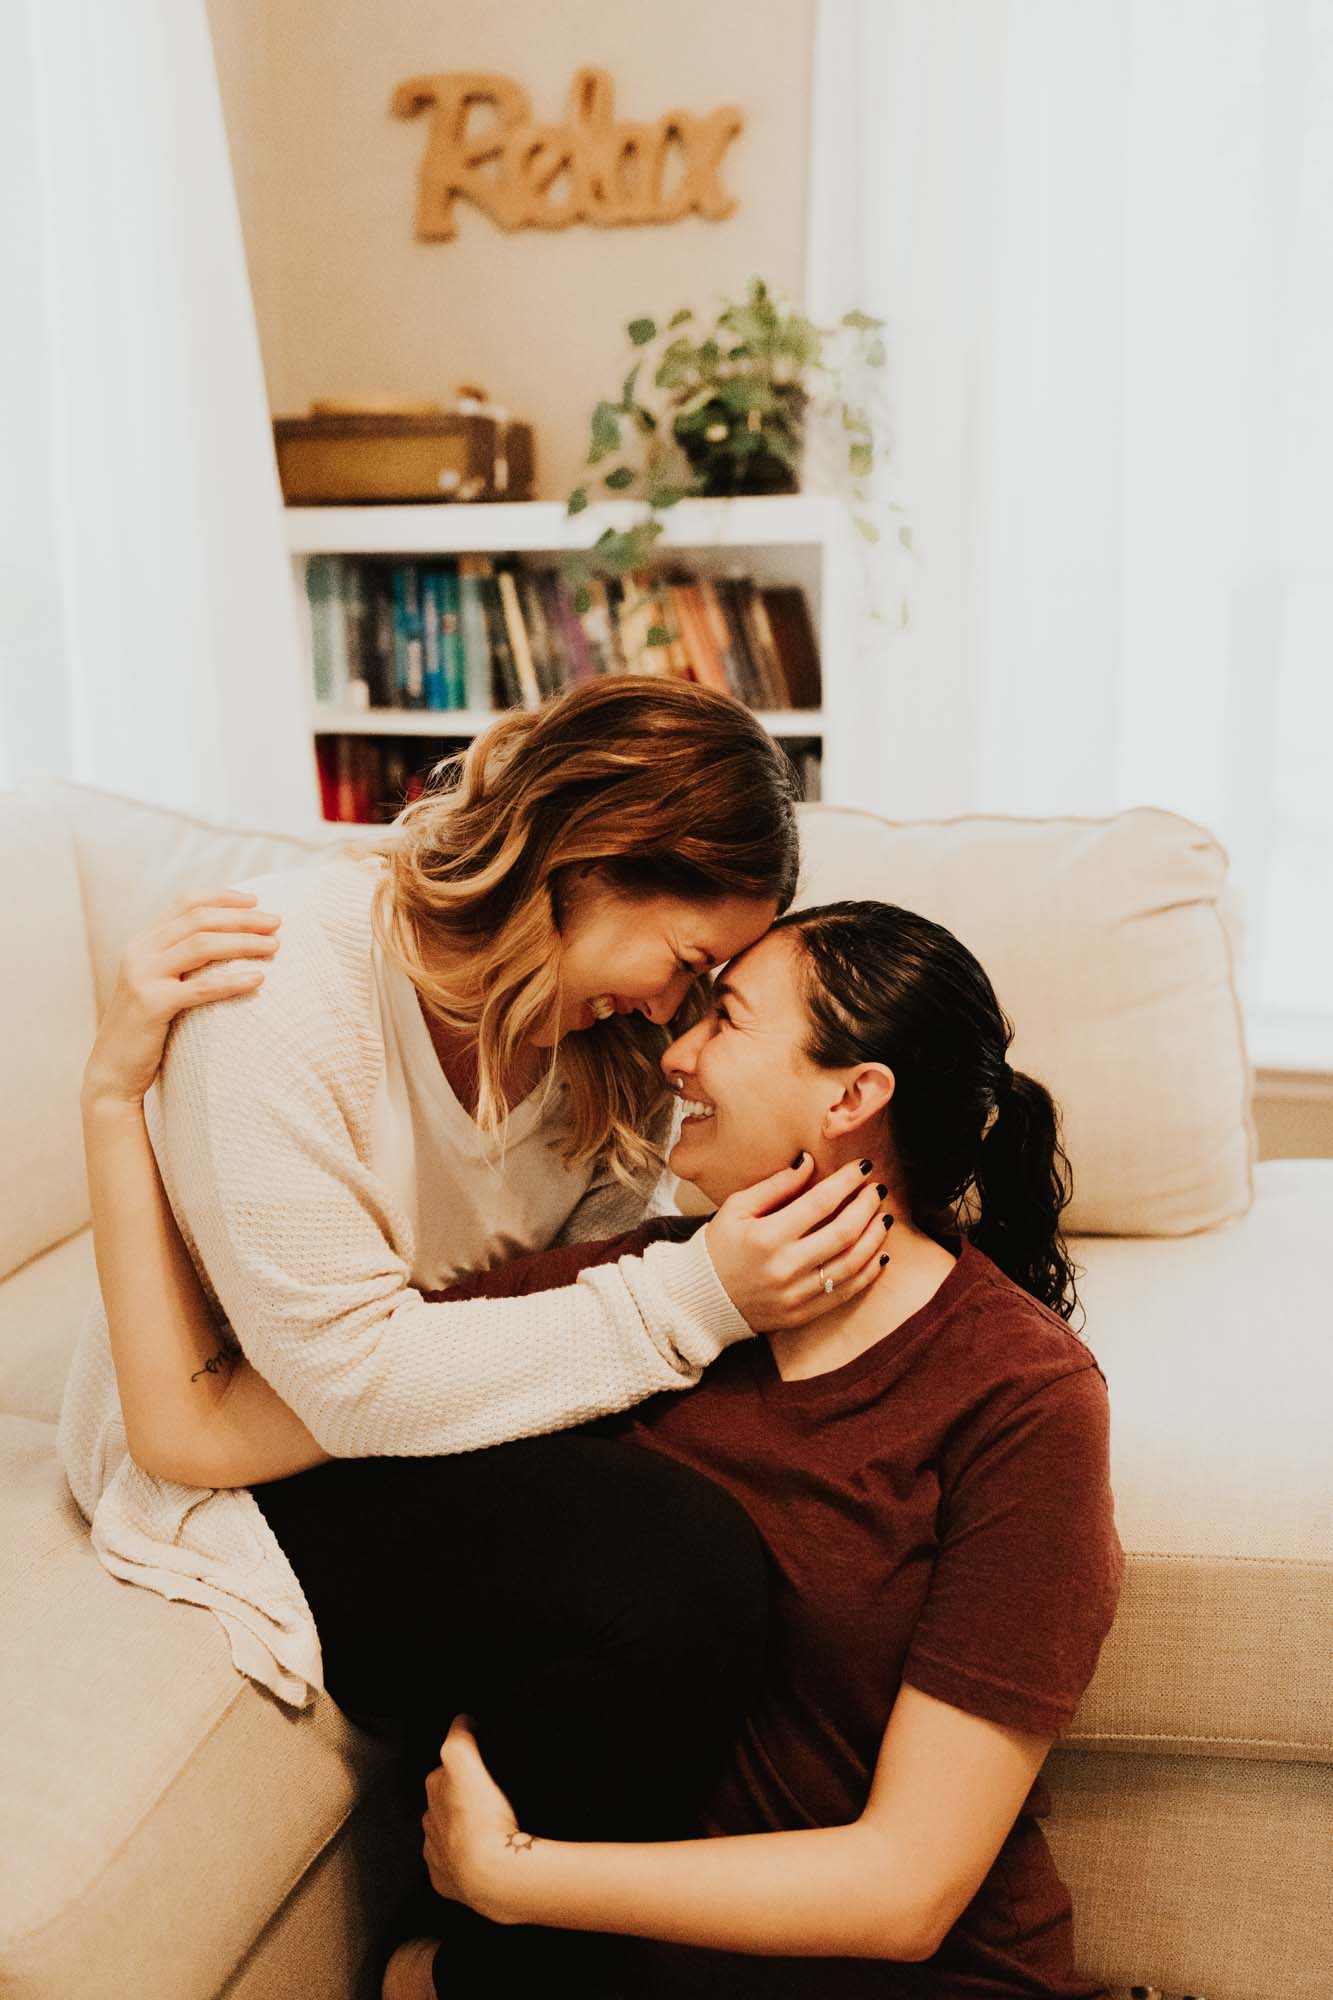 Casual, romantic photo session to celebrate long term love | Meg Amorette Photography | Featured on Equally Wed, the leading LGBTQ+ wedding magazine